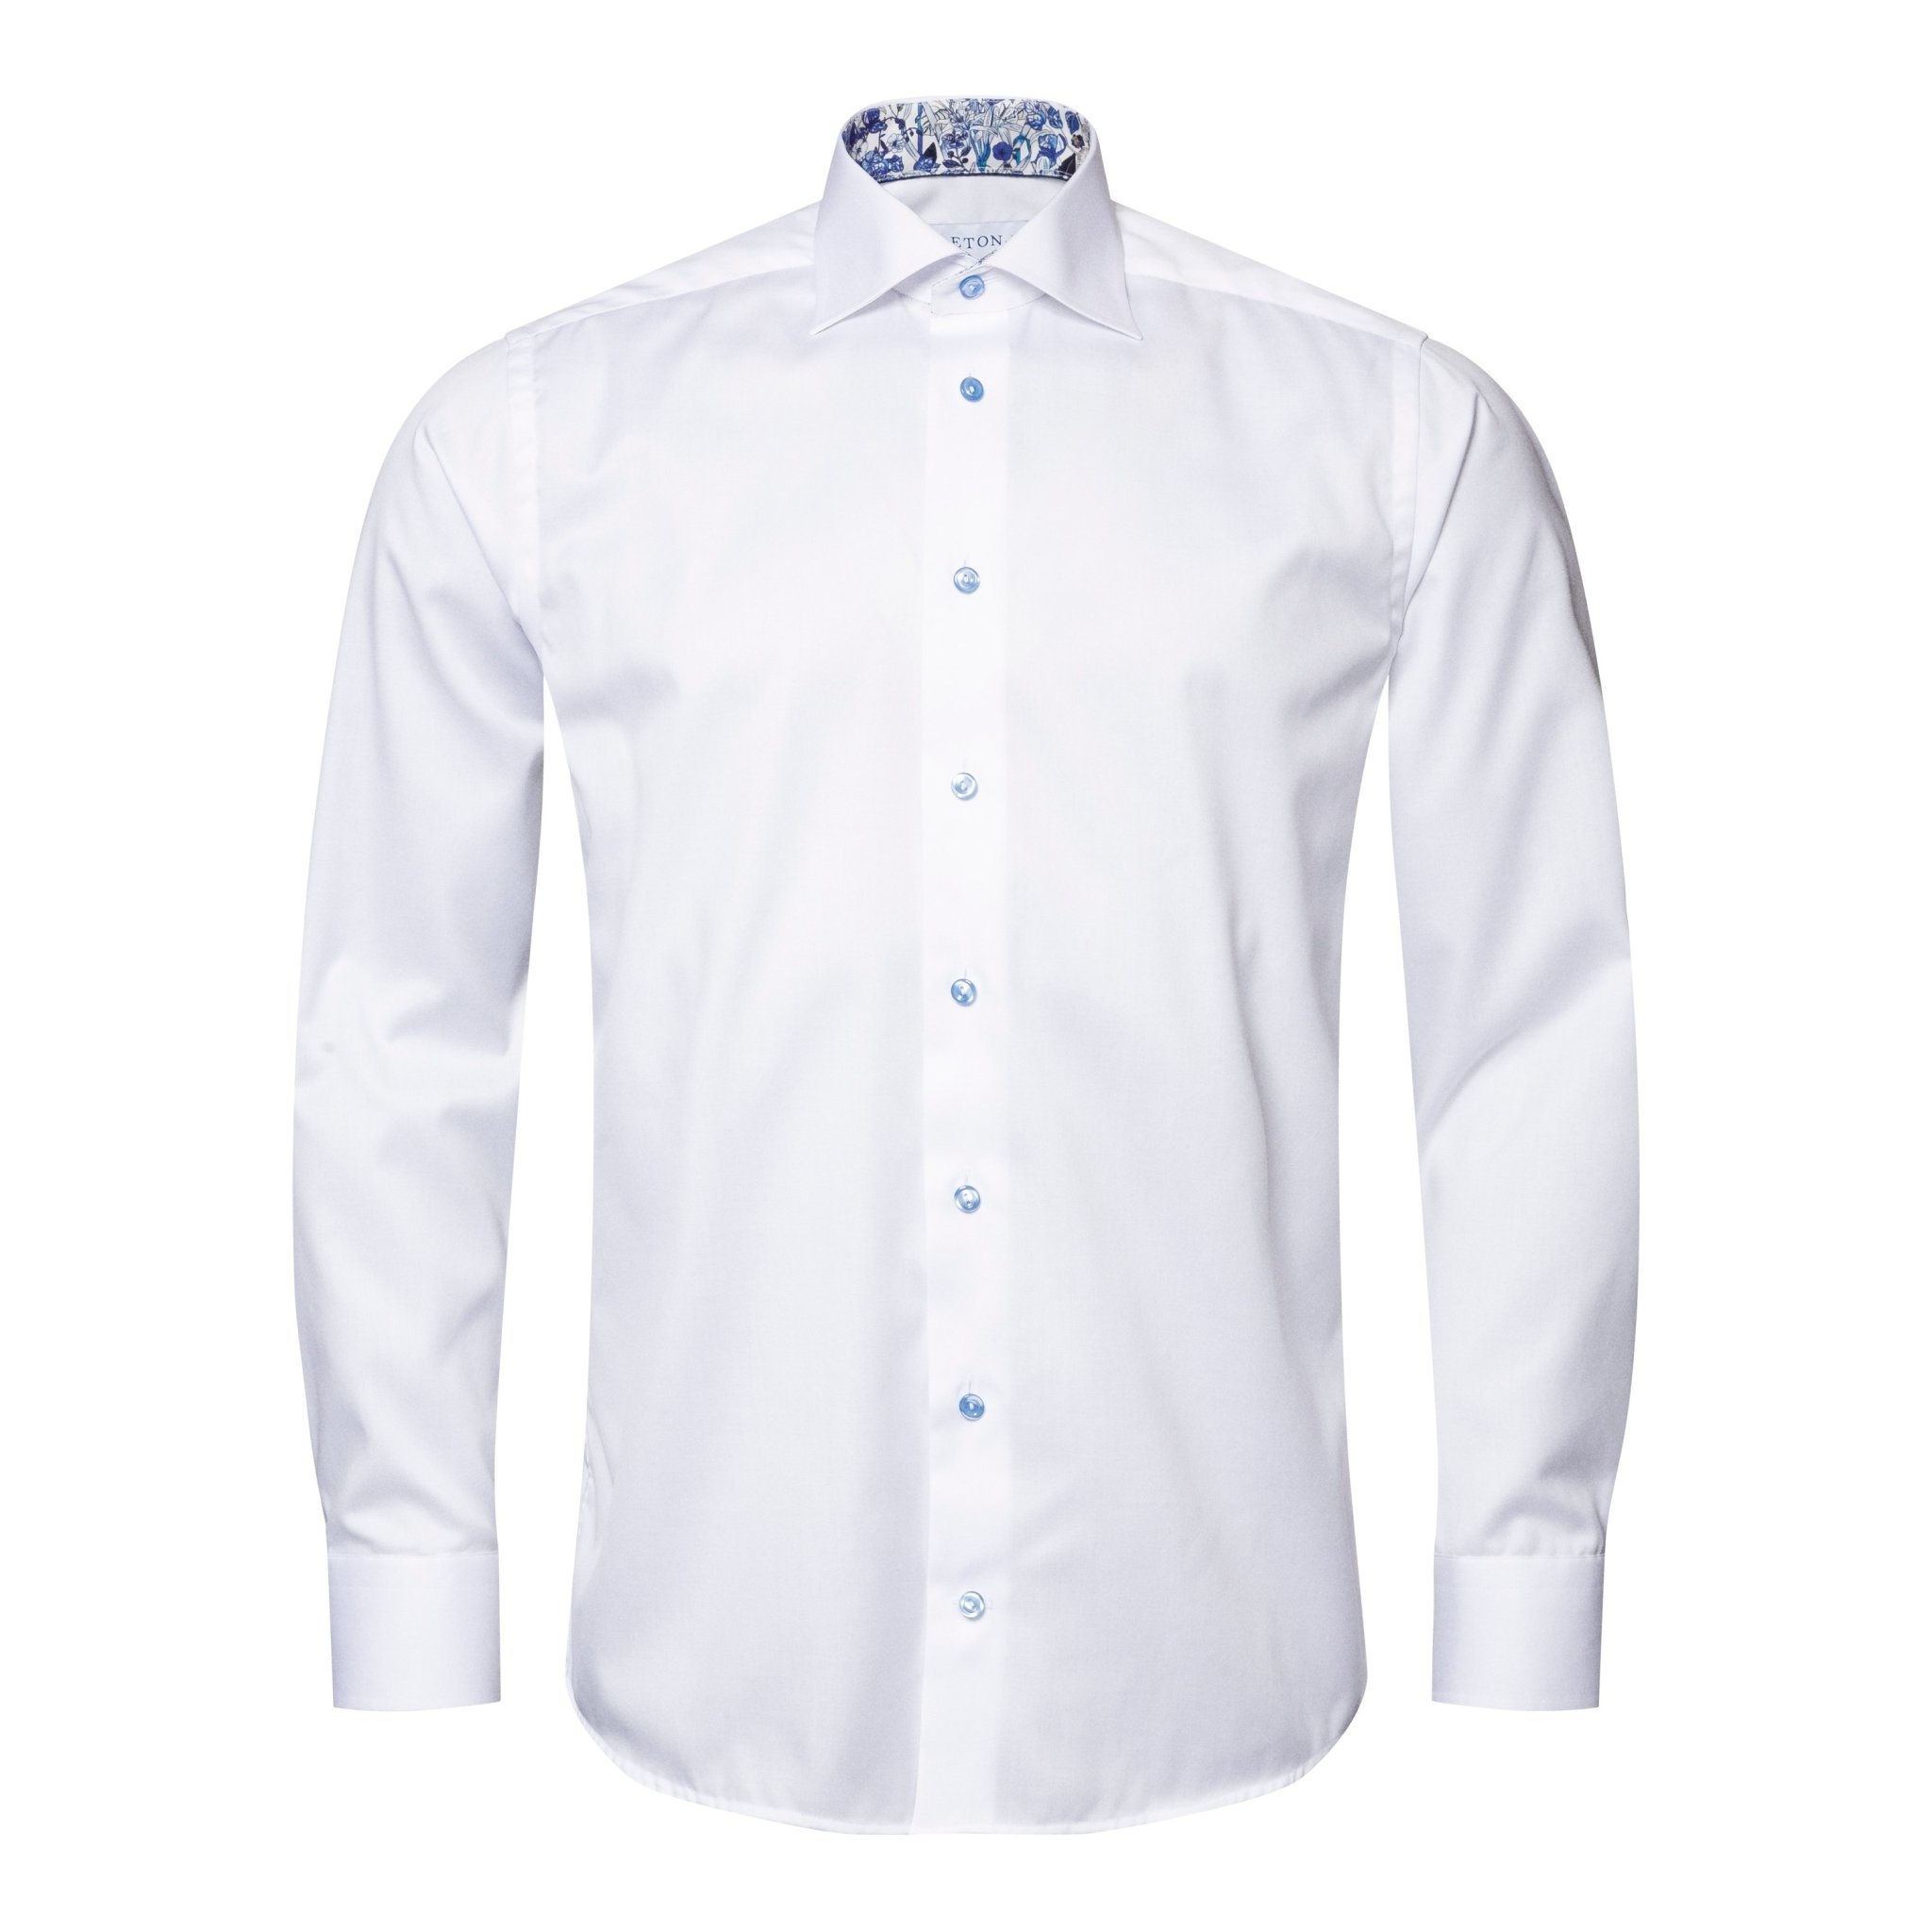 Eton Signature twill with flower trim and blue button